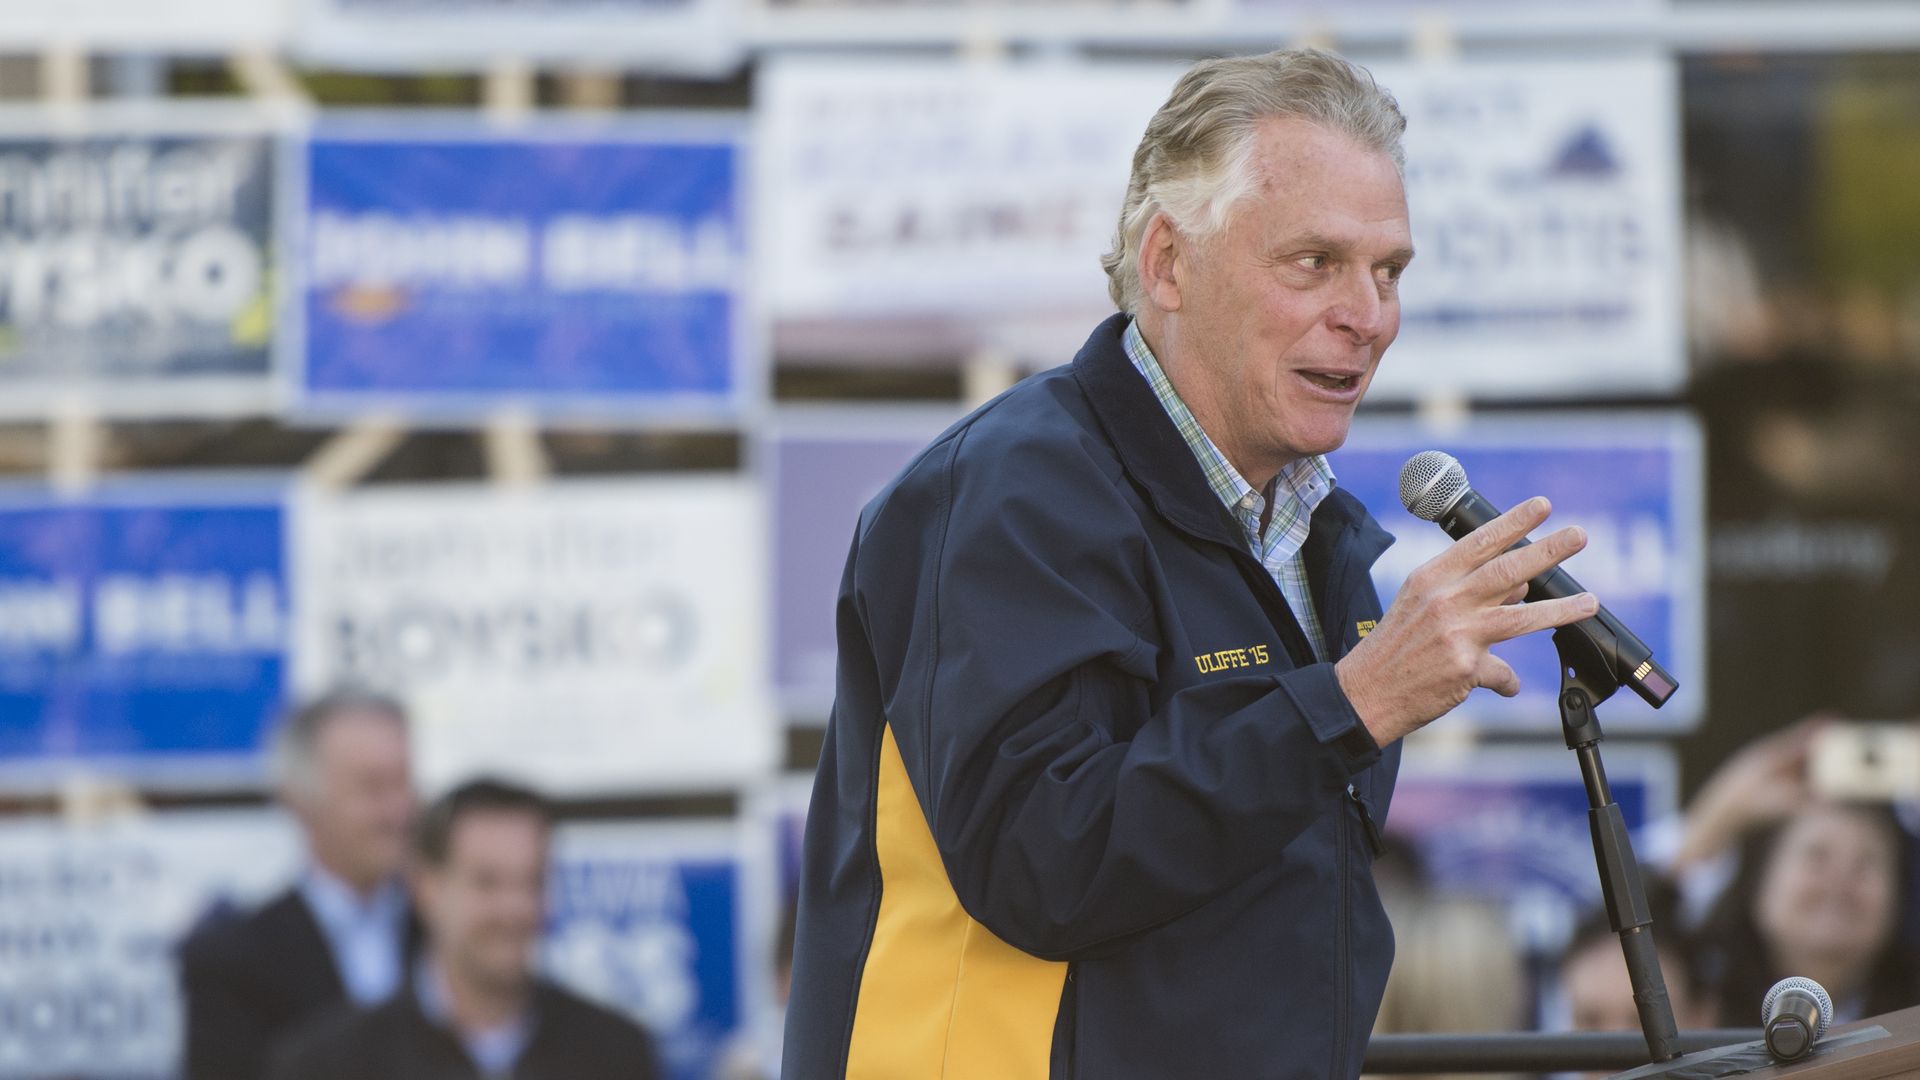 Terry McAuliffe is seen while campaigning.